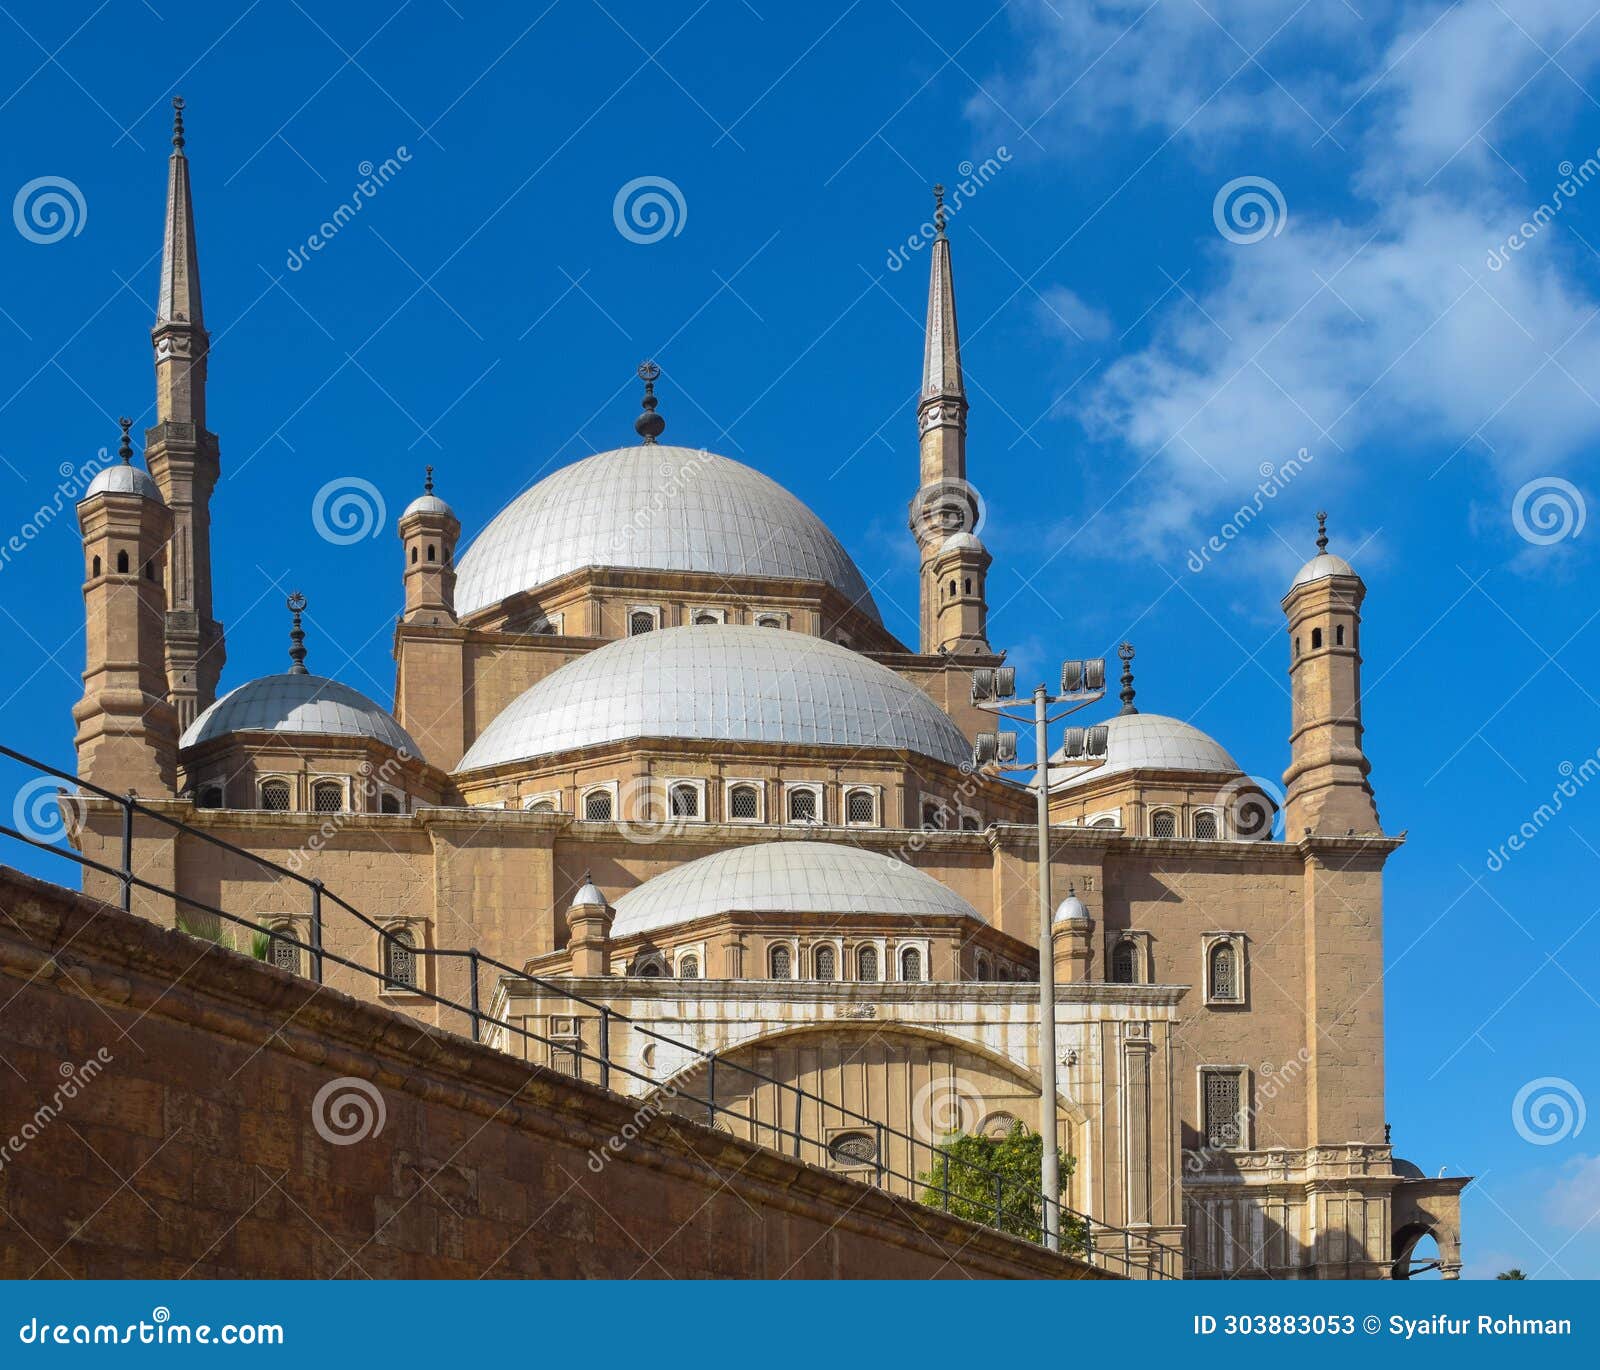 ali pasha mosque which has many interesting domes with four minarets in each corner which is almost similar to the hagia sopia